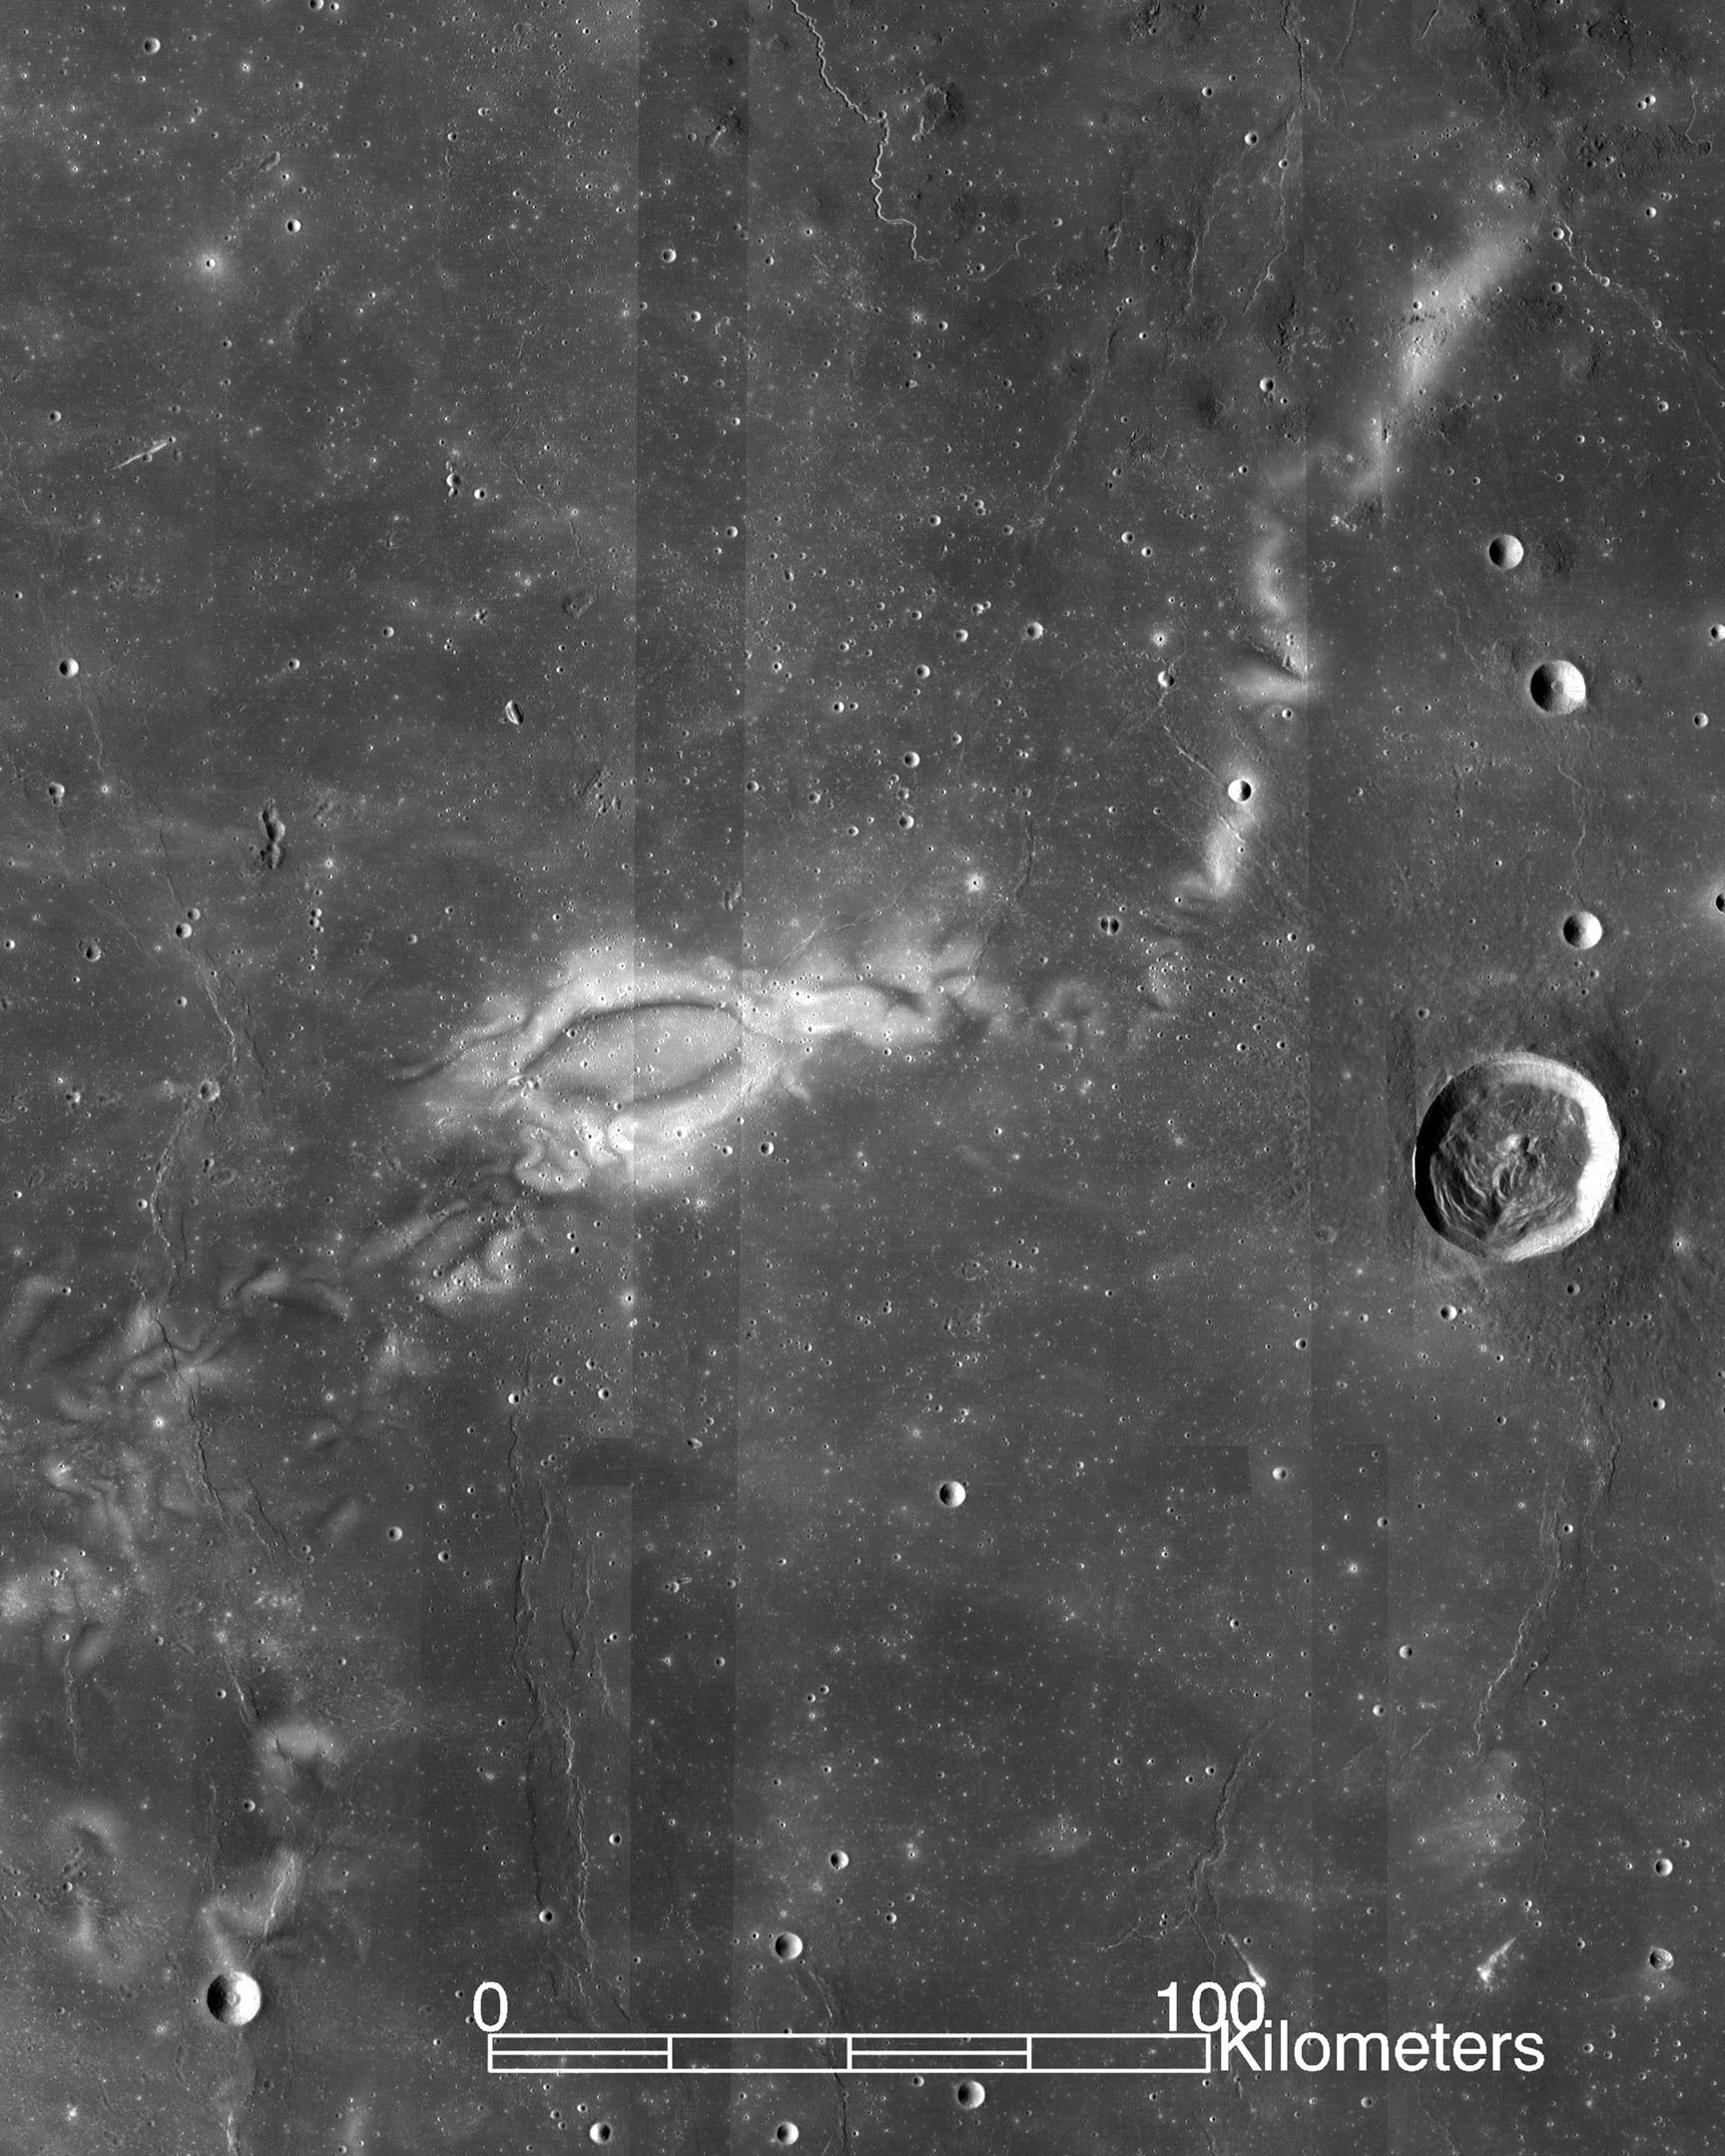 A white curly eye-like shape over a gray-scale pock-marked surface. Satellite image of the Moon. A scale bar shows the image is over 100 kilometers wide. 